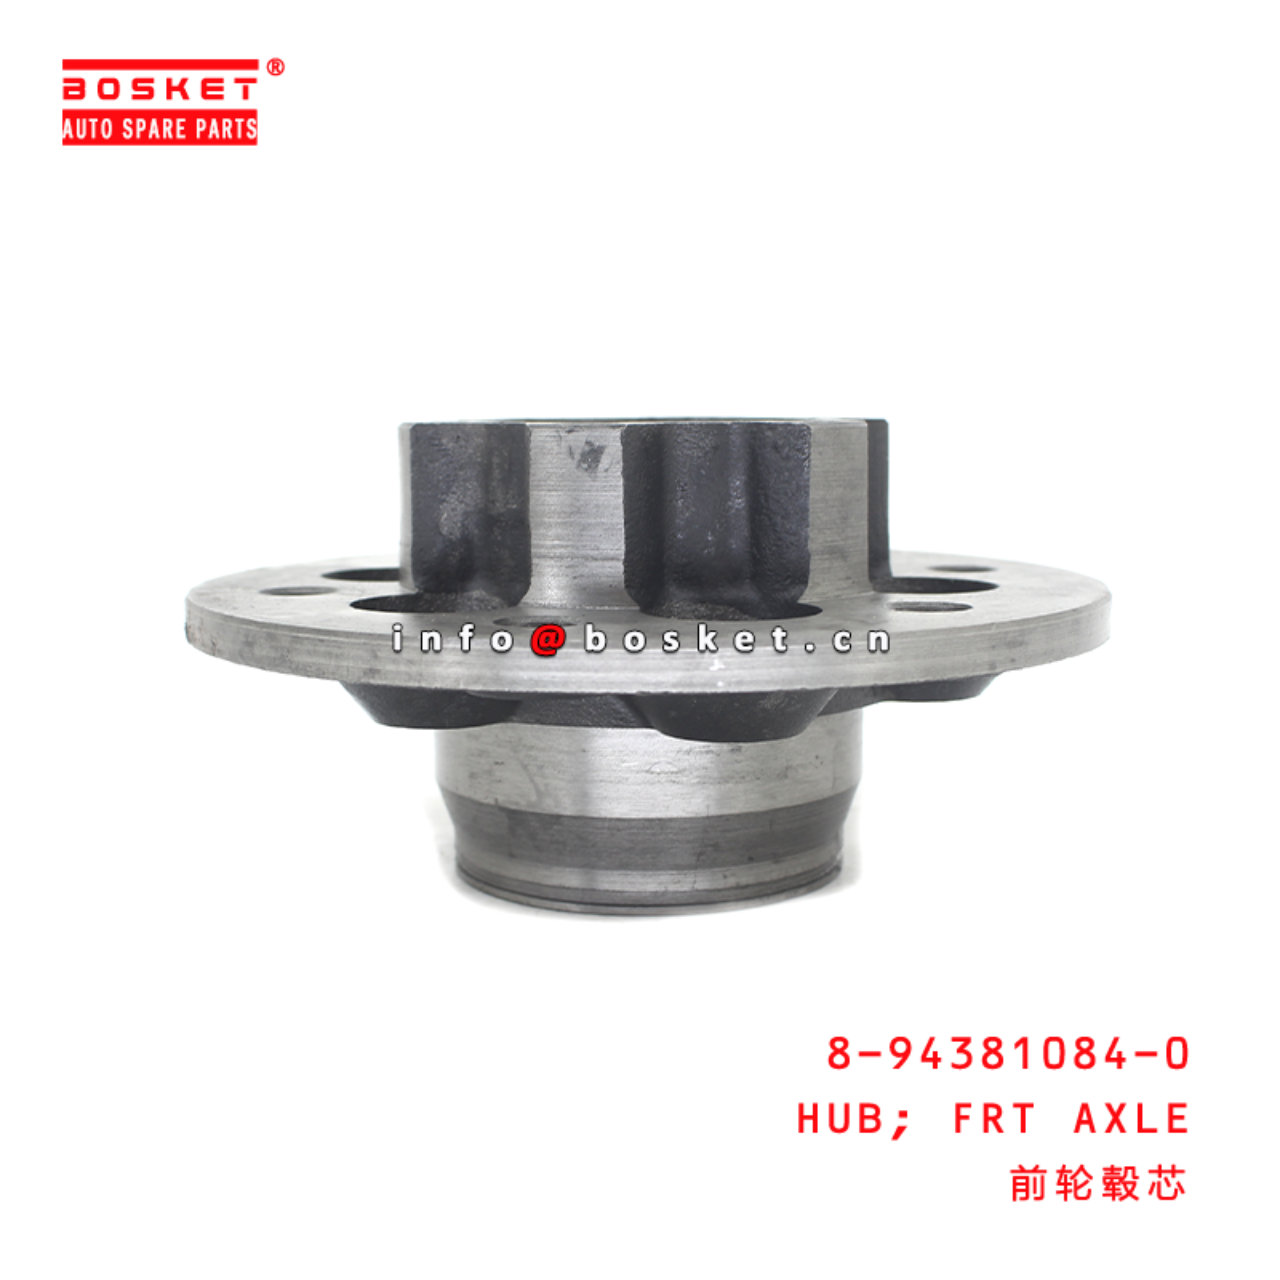 8-94381084-0 Front Axle Hub suitable for ISUZU 8943810840 - For 